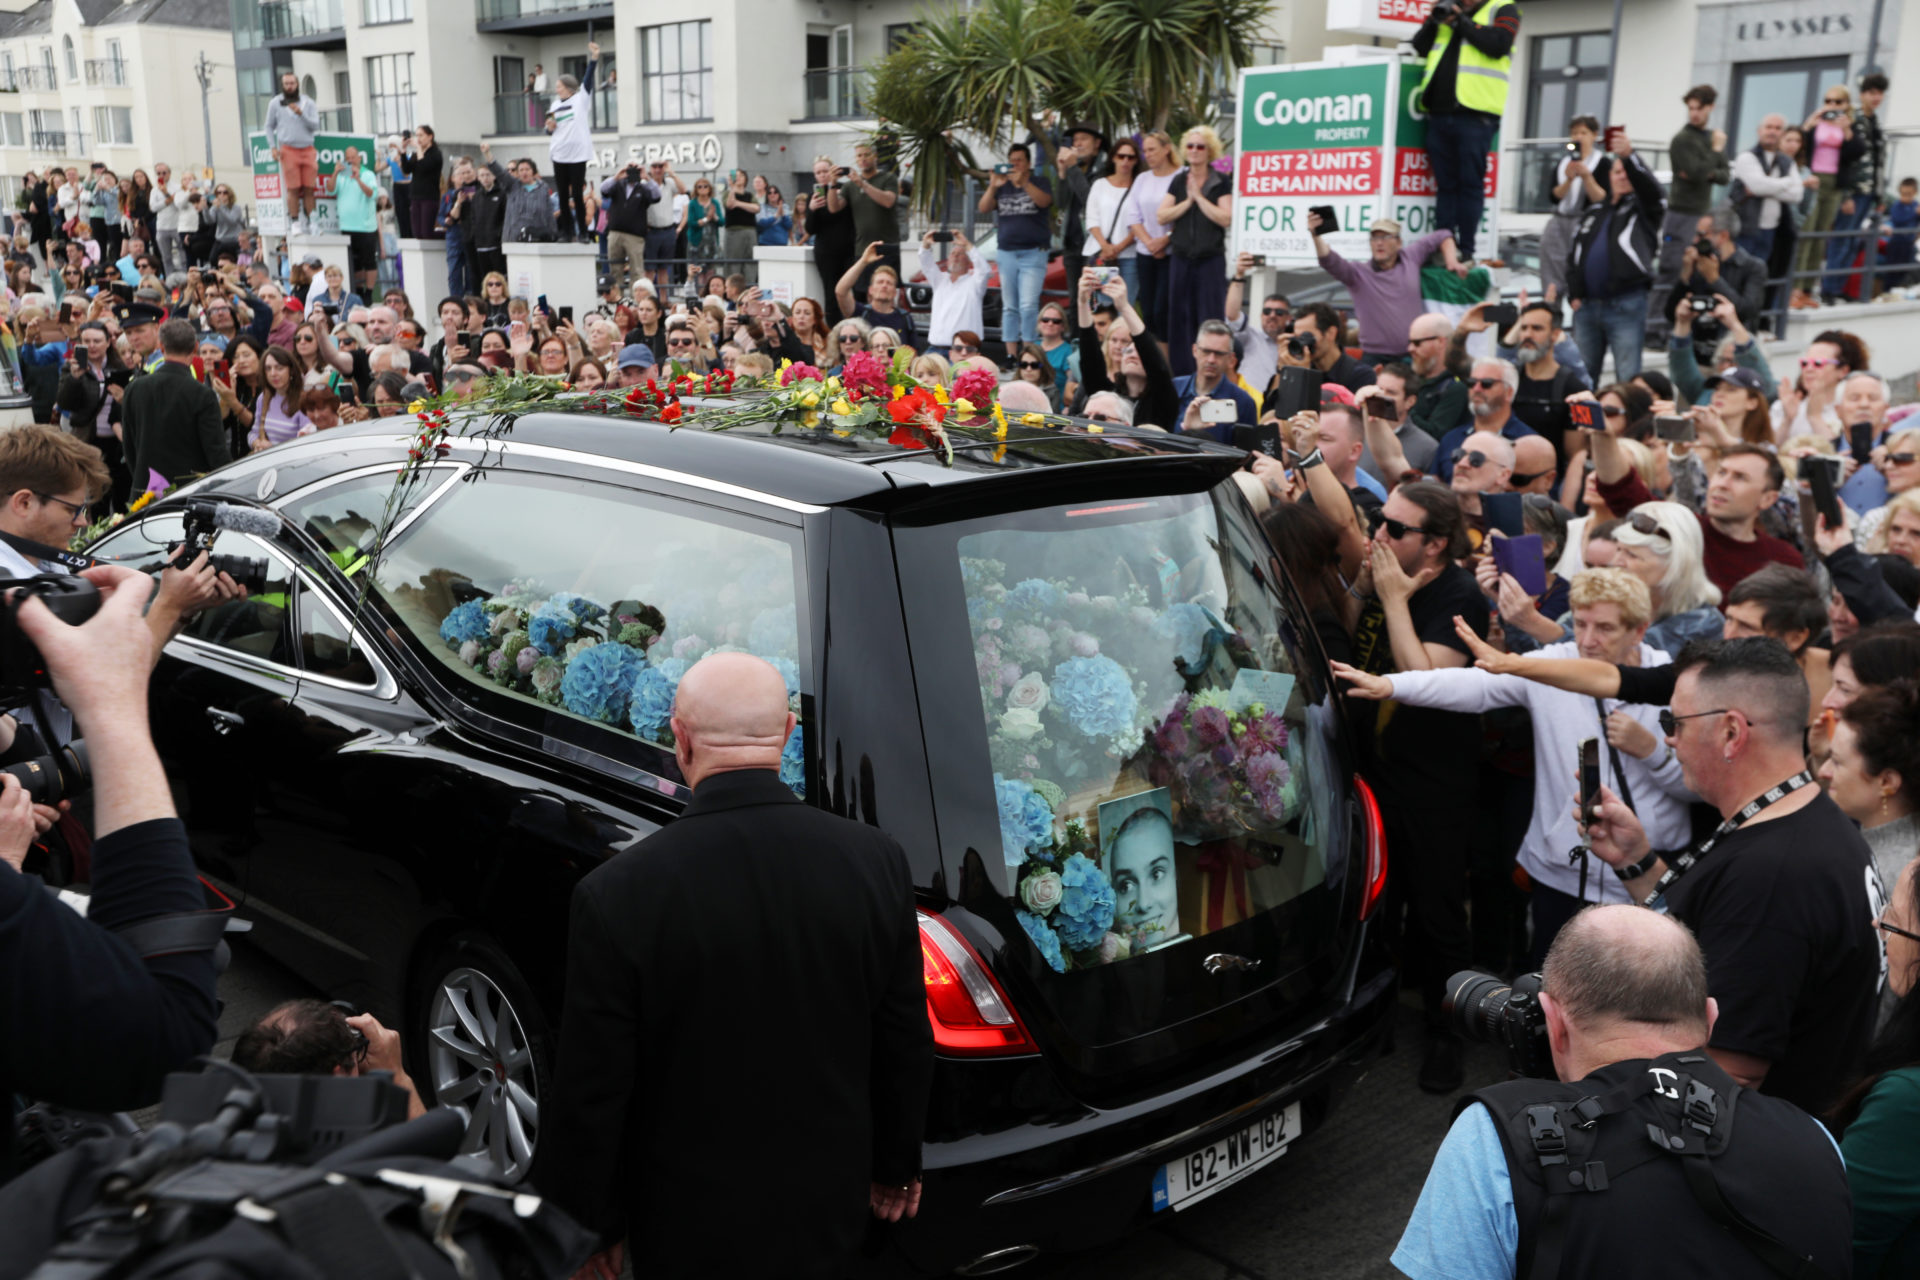 The hearse carrying Sinead O'Connor's body passes by crowds of well-wishers and mourners lining the Bray seafront ahead of her funeral, 08-08-2023. Image: Sasko Lazarov/RollingNews